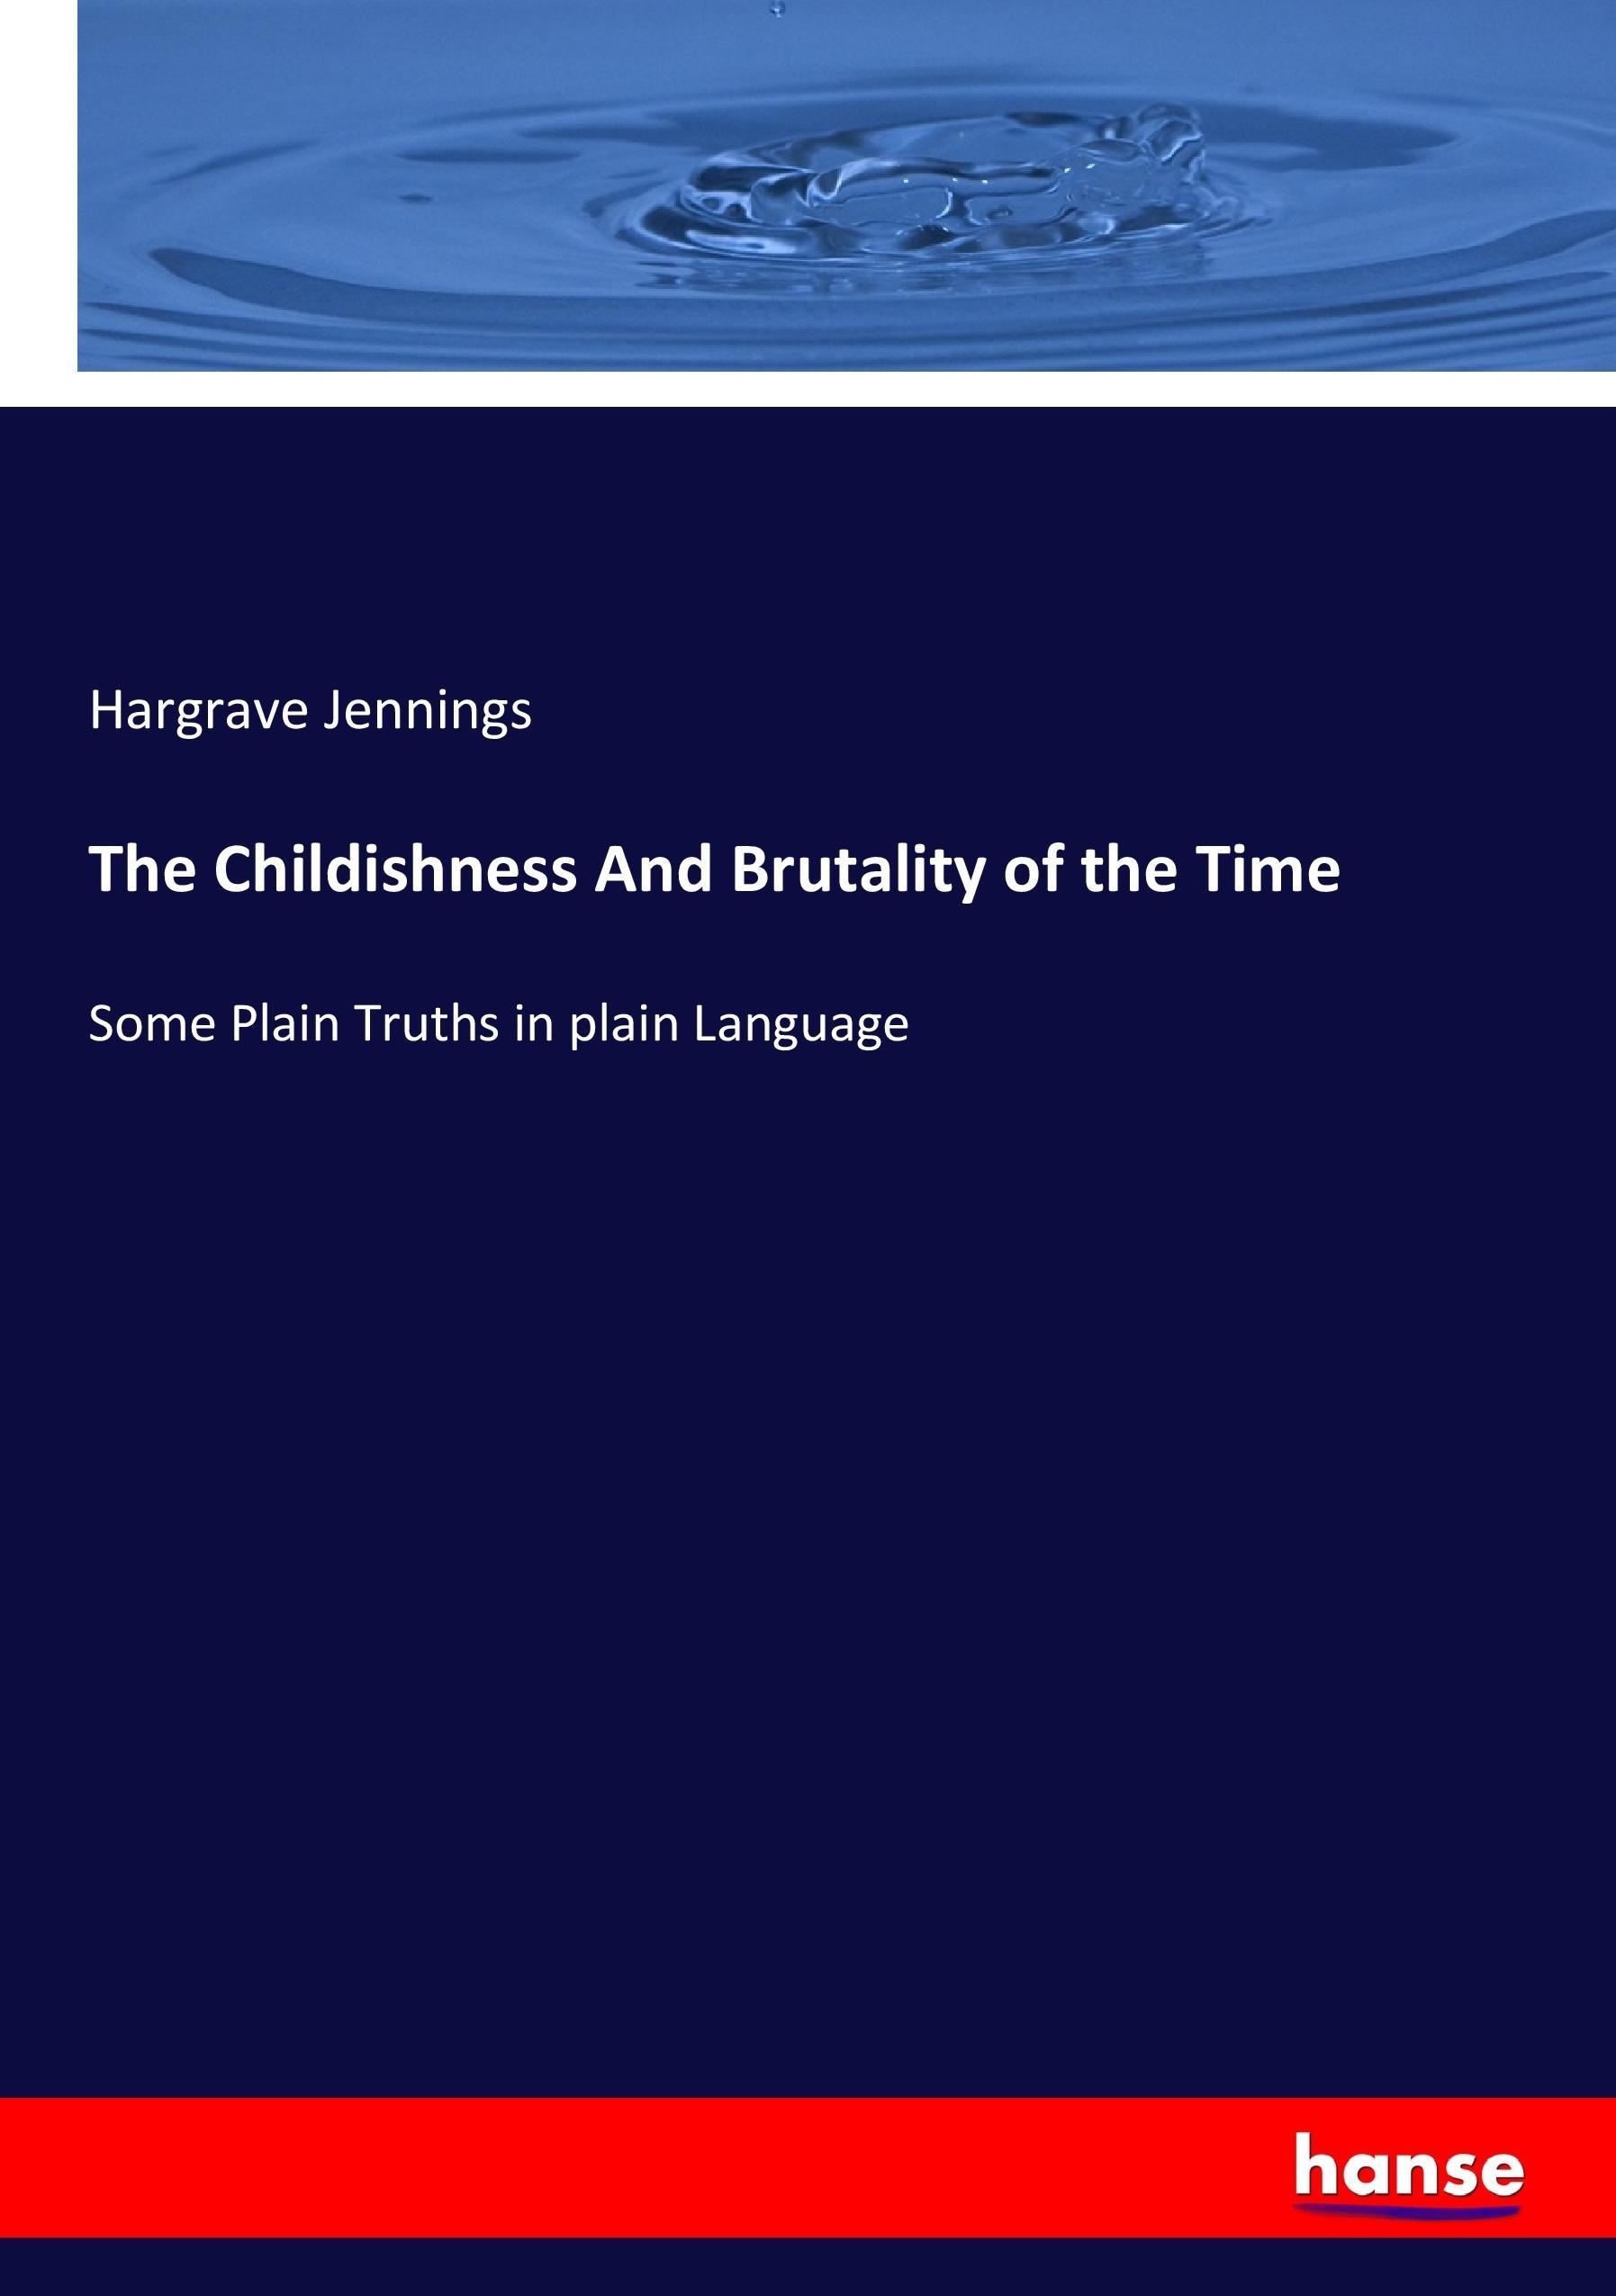 The Childishness And Brutality of the Time | Some Plain Truths in plain Language | Hargrave Jennings | Taschenbuch | Paperback | 356 S. | Englisch | 2017 | hansebooks | EAN 9783744743945 - Jennings, Hargrave